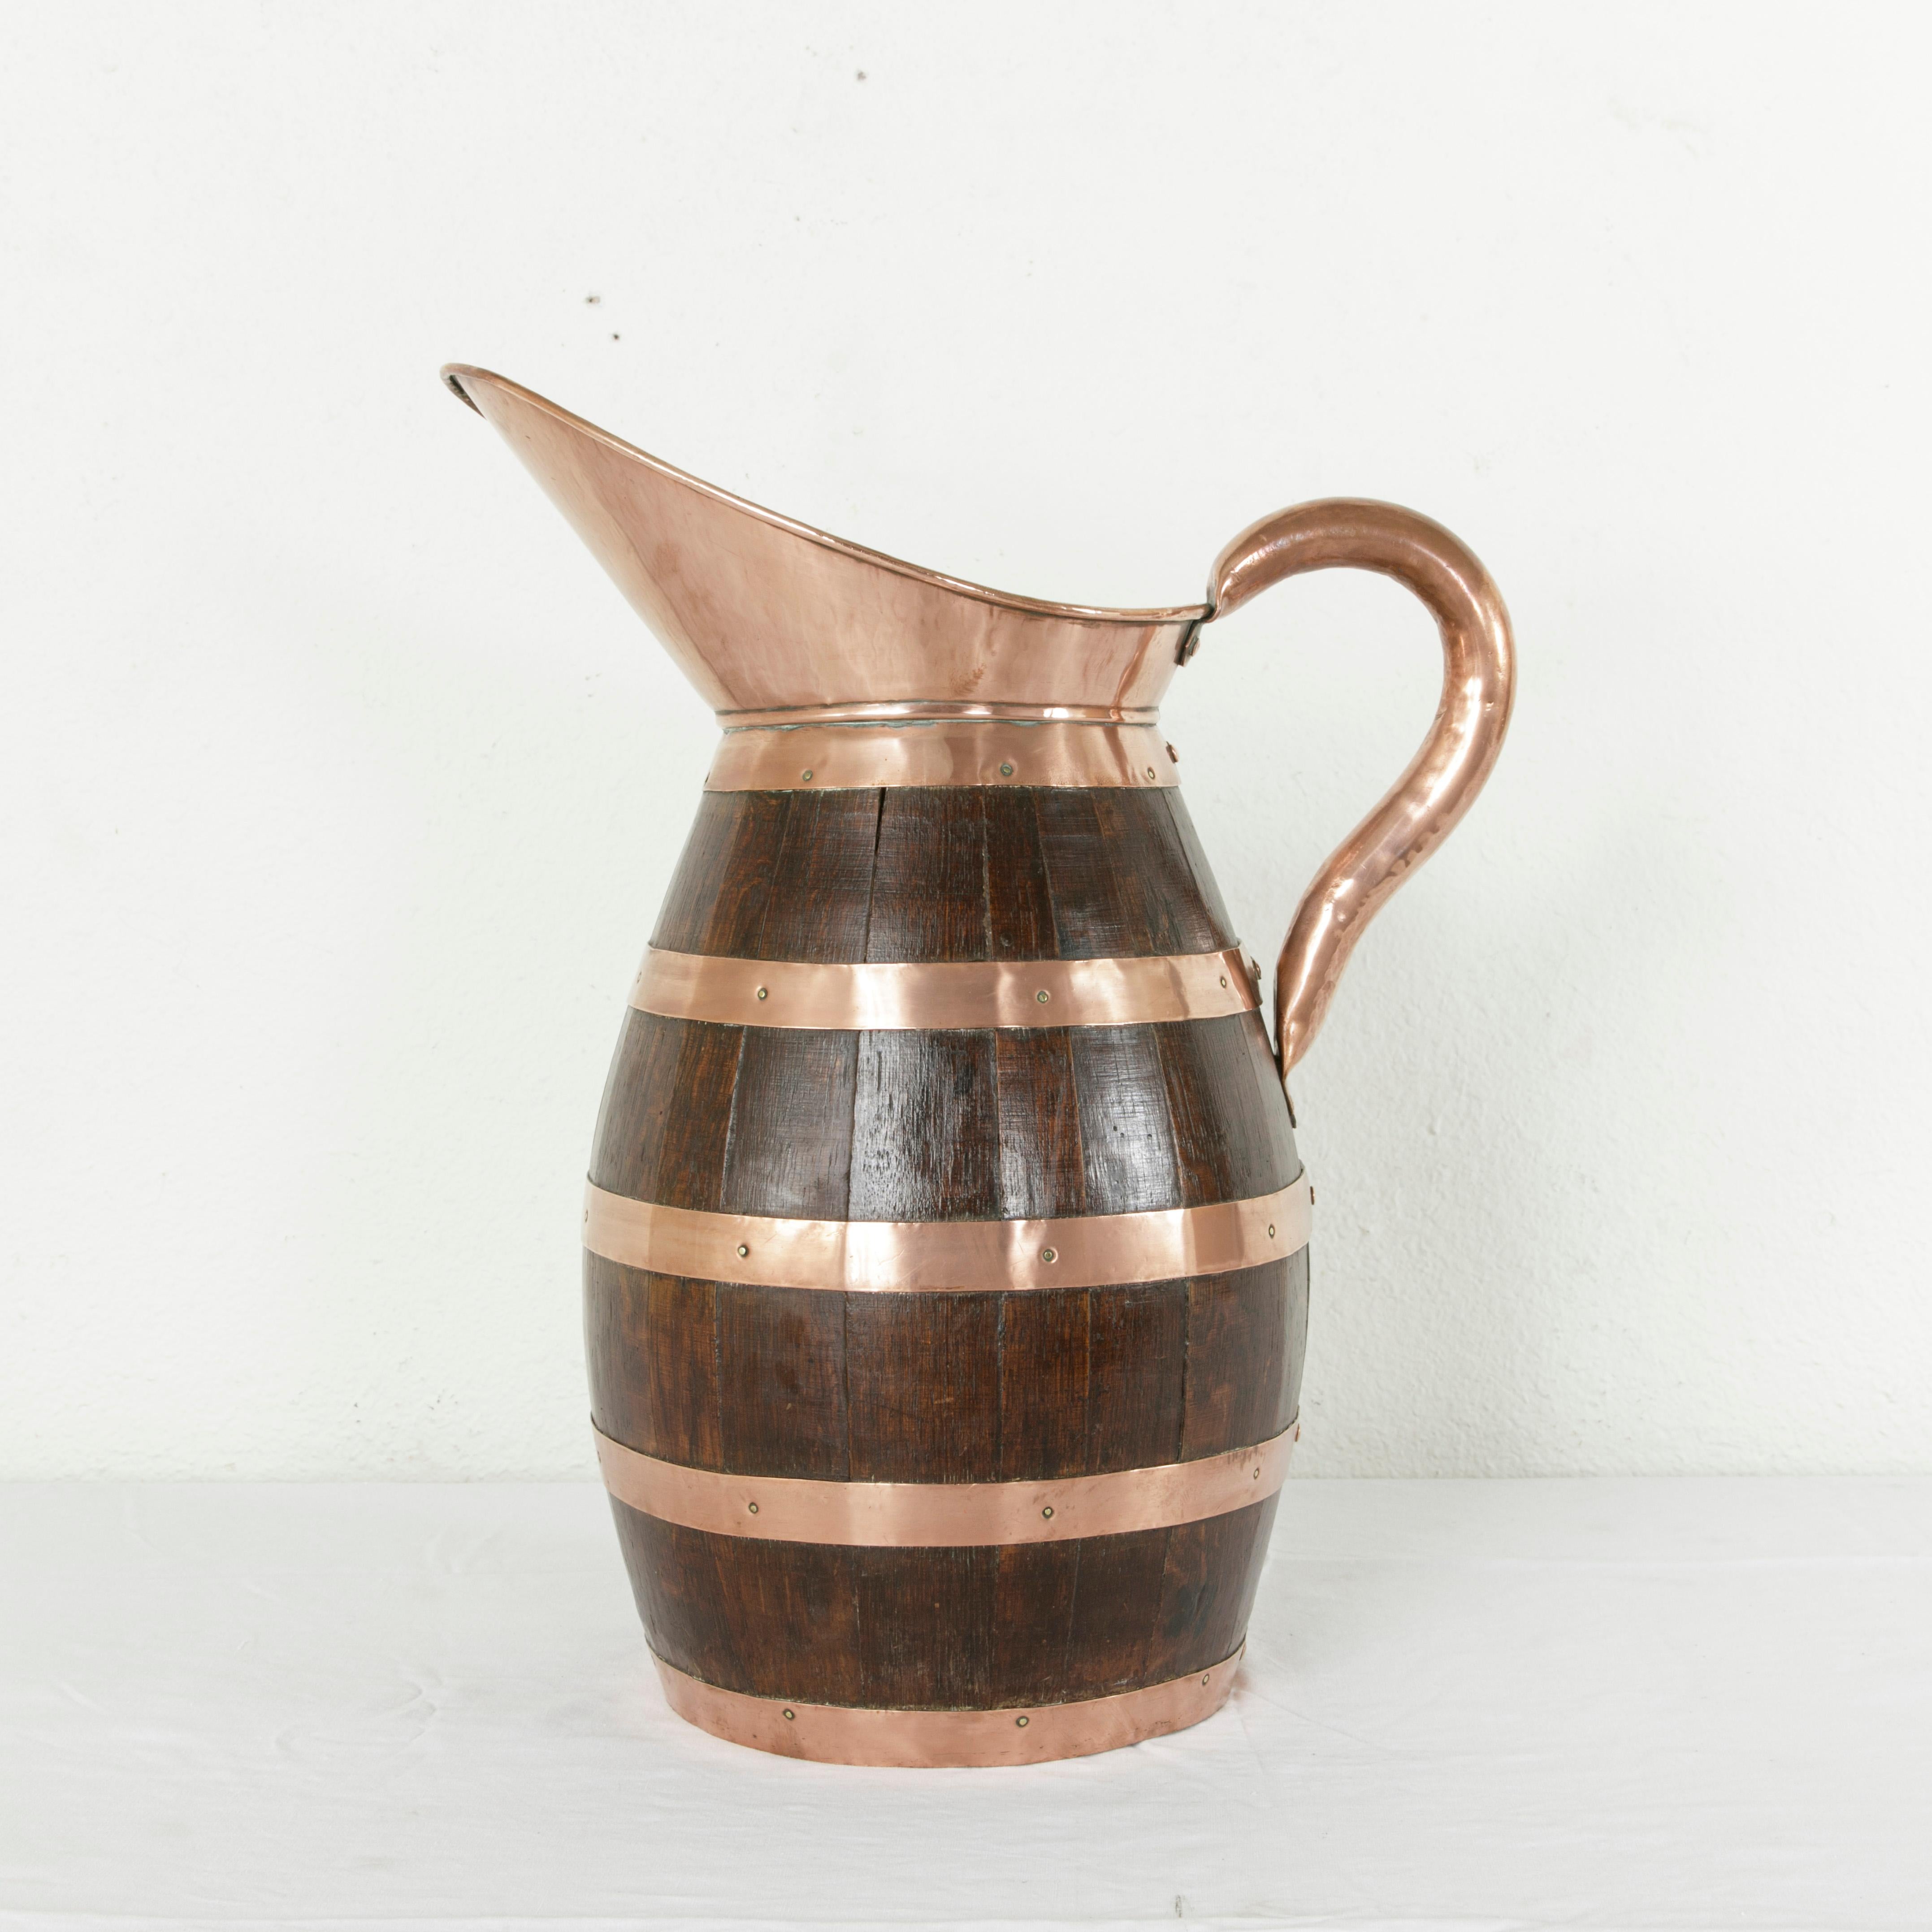 Standing at an impressive 22 inches in height, this very large late 19th century oak cider pitcher from Normandy, France, features riveted copper banding and a copper spout and handle. Artisan-made by a barrel maker, this pitcher was originally used